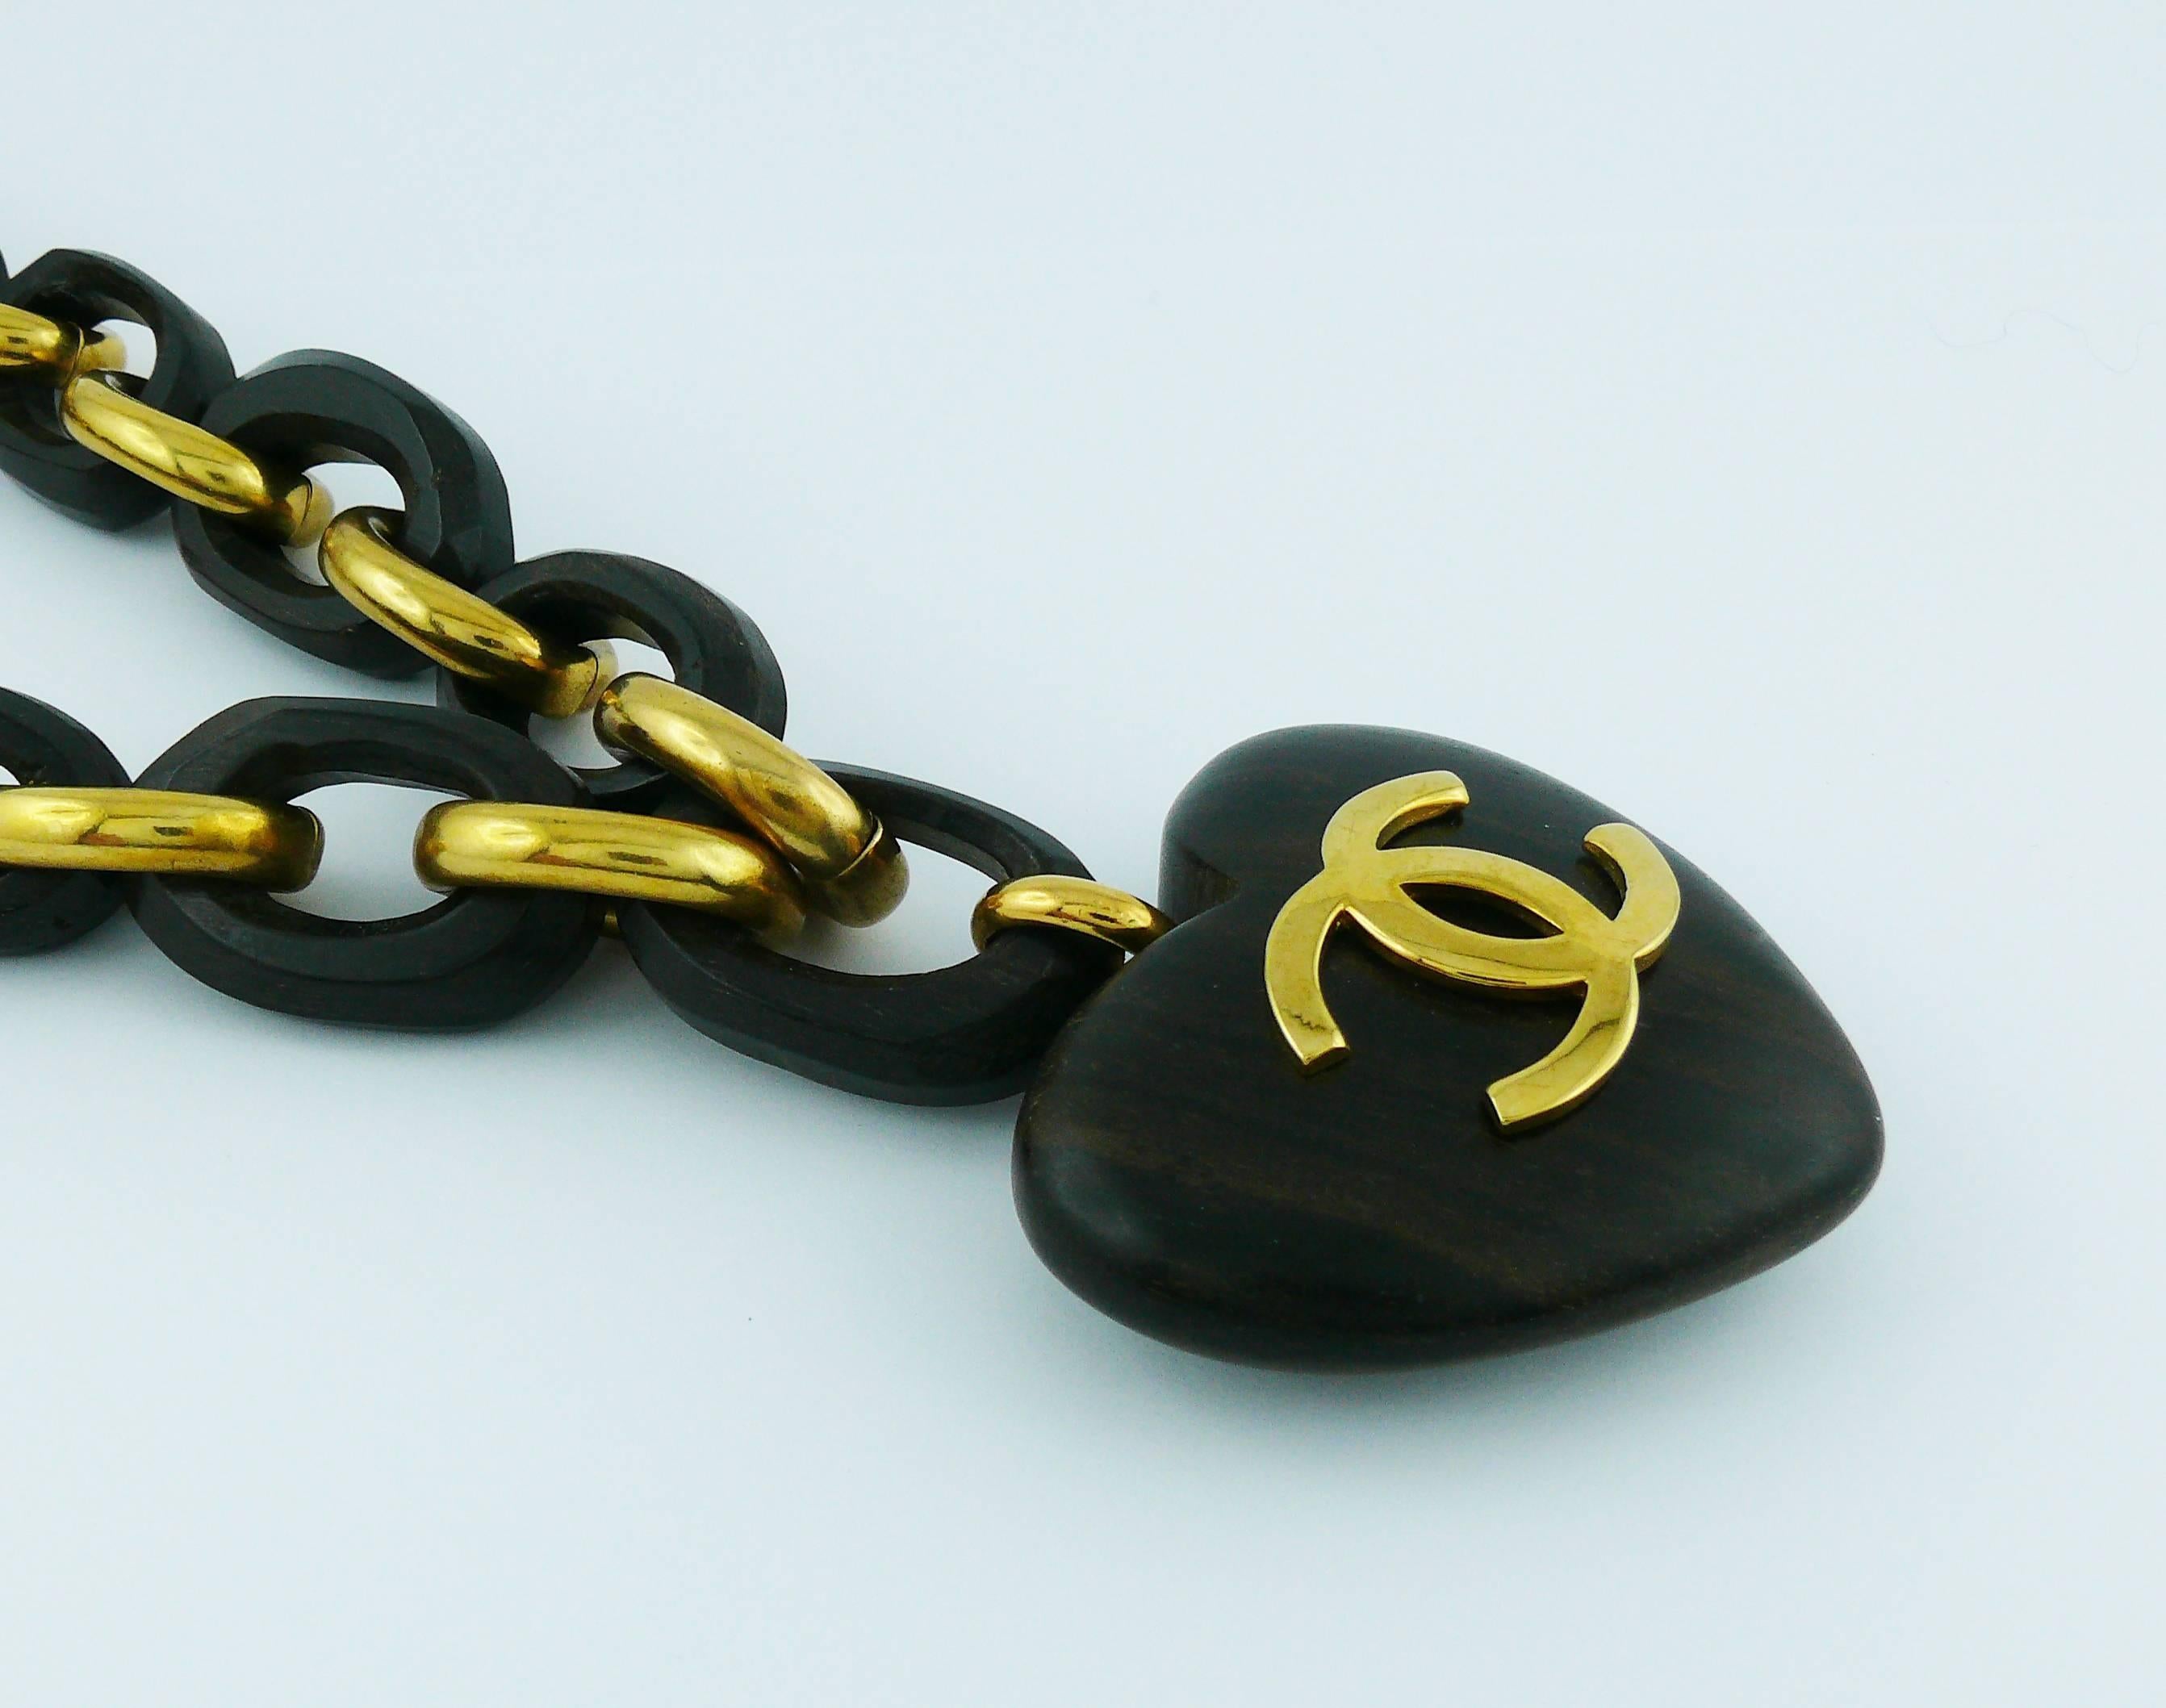 black heart chanel necklace